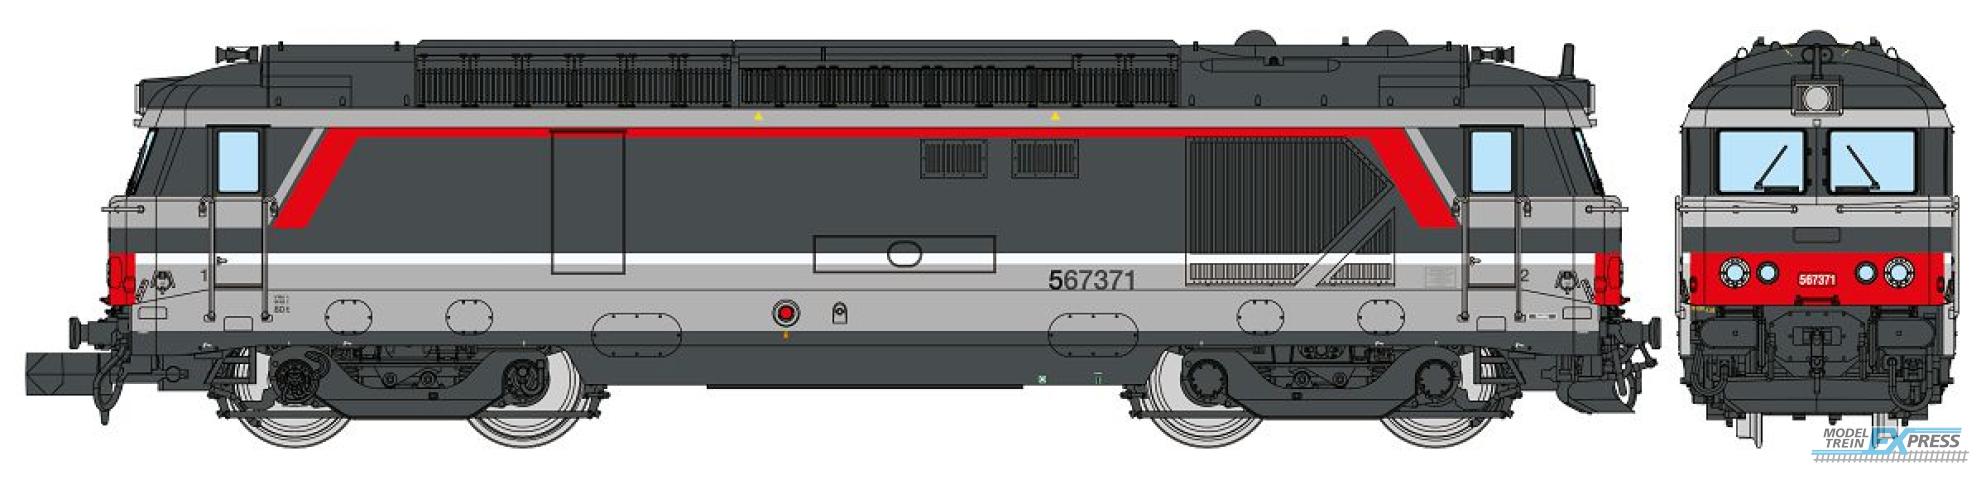 REE models NW-326S BB 67371 "Multiservice" livery, CHAMBERY, SNCF Era V-VI DCC SOUND